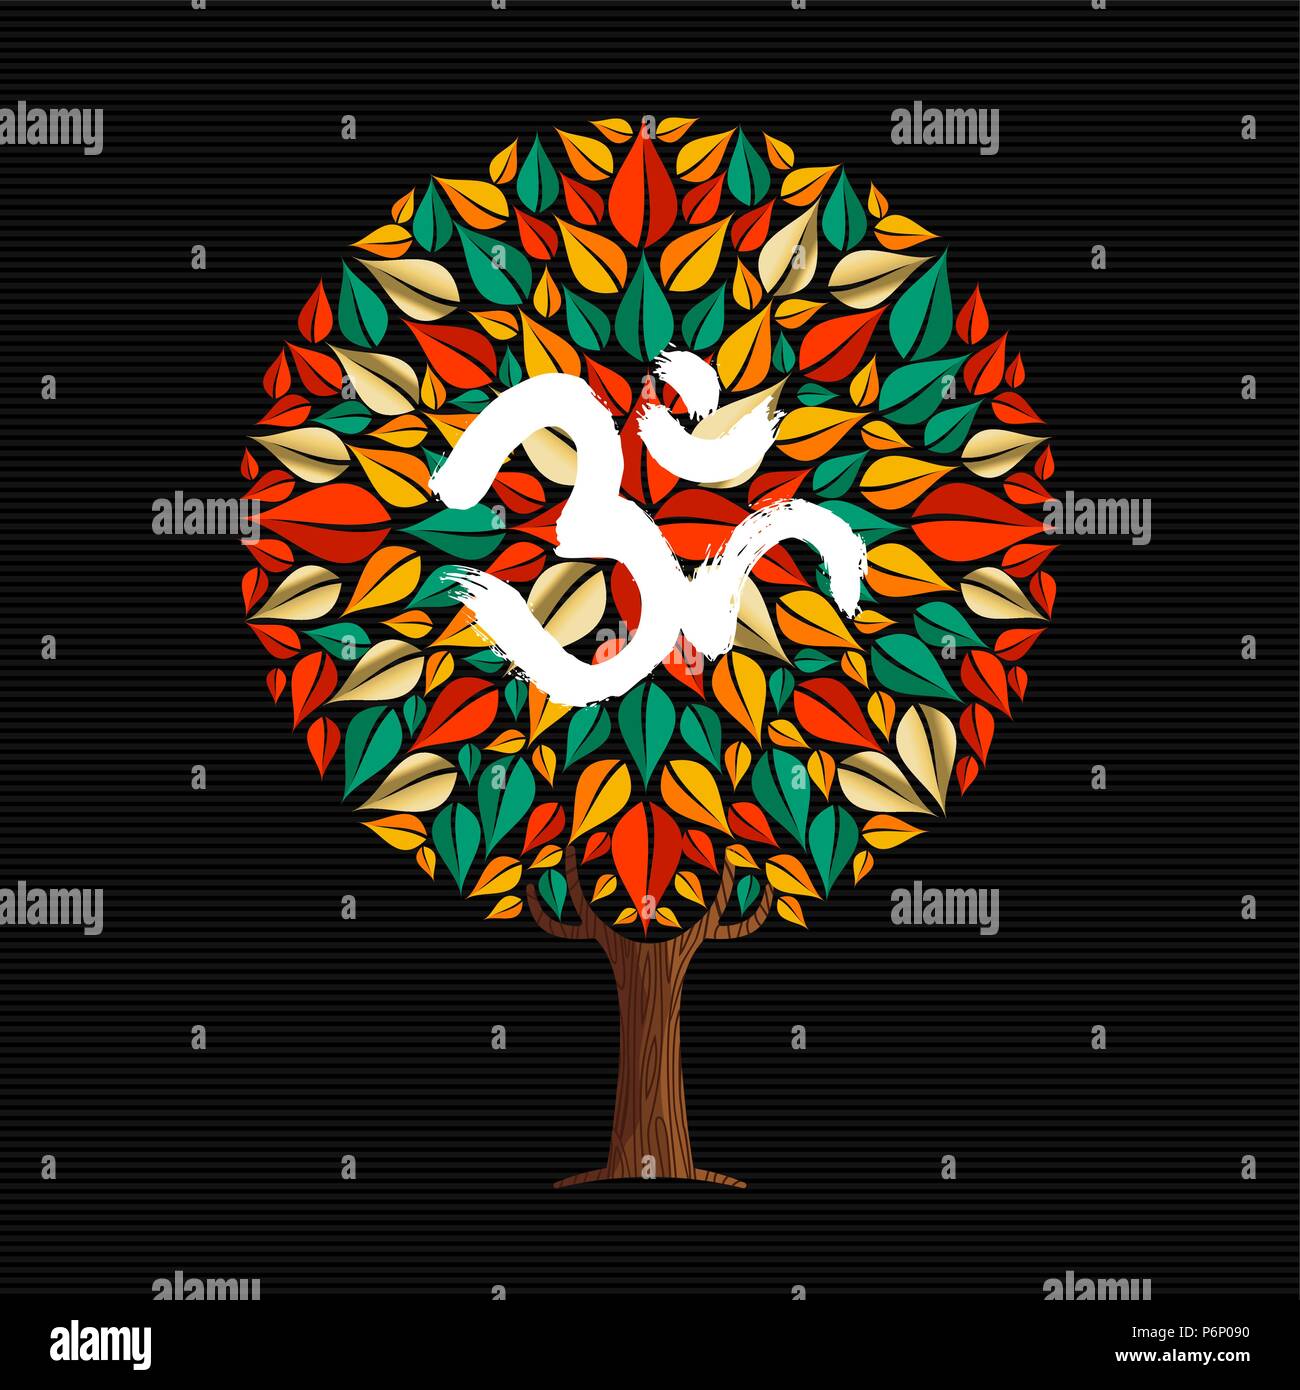 Yoga tree concept illustration. Om traditional calligraphy symbol, brush art style decoration. EPS10 vector. Stock Vector